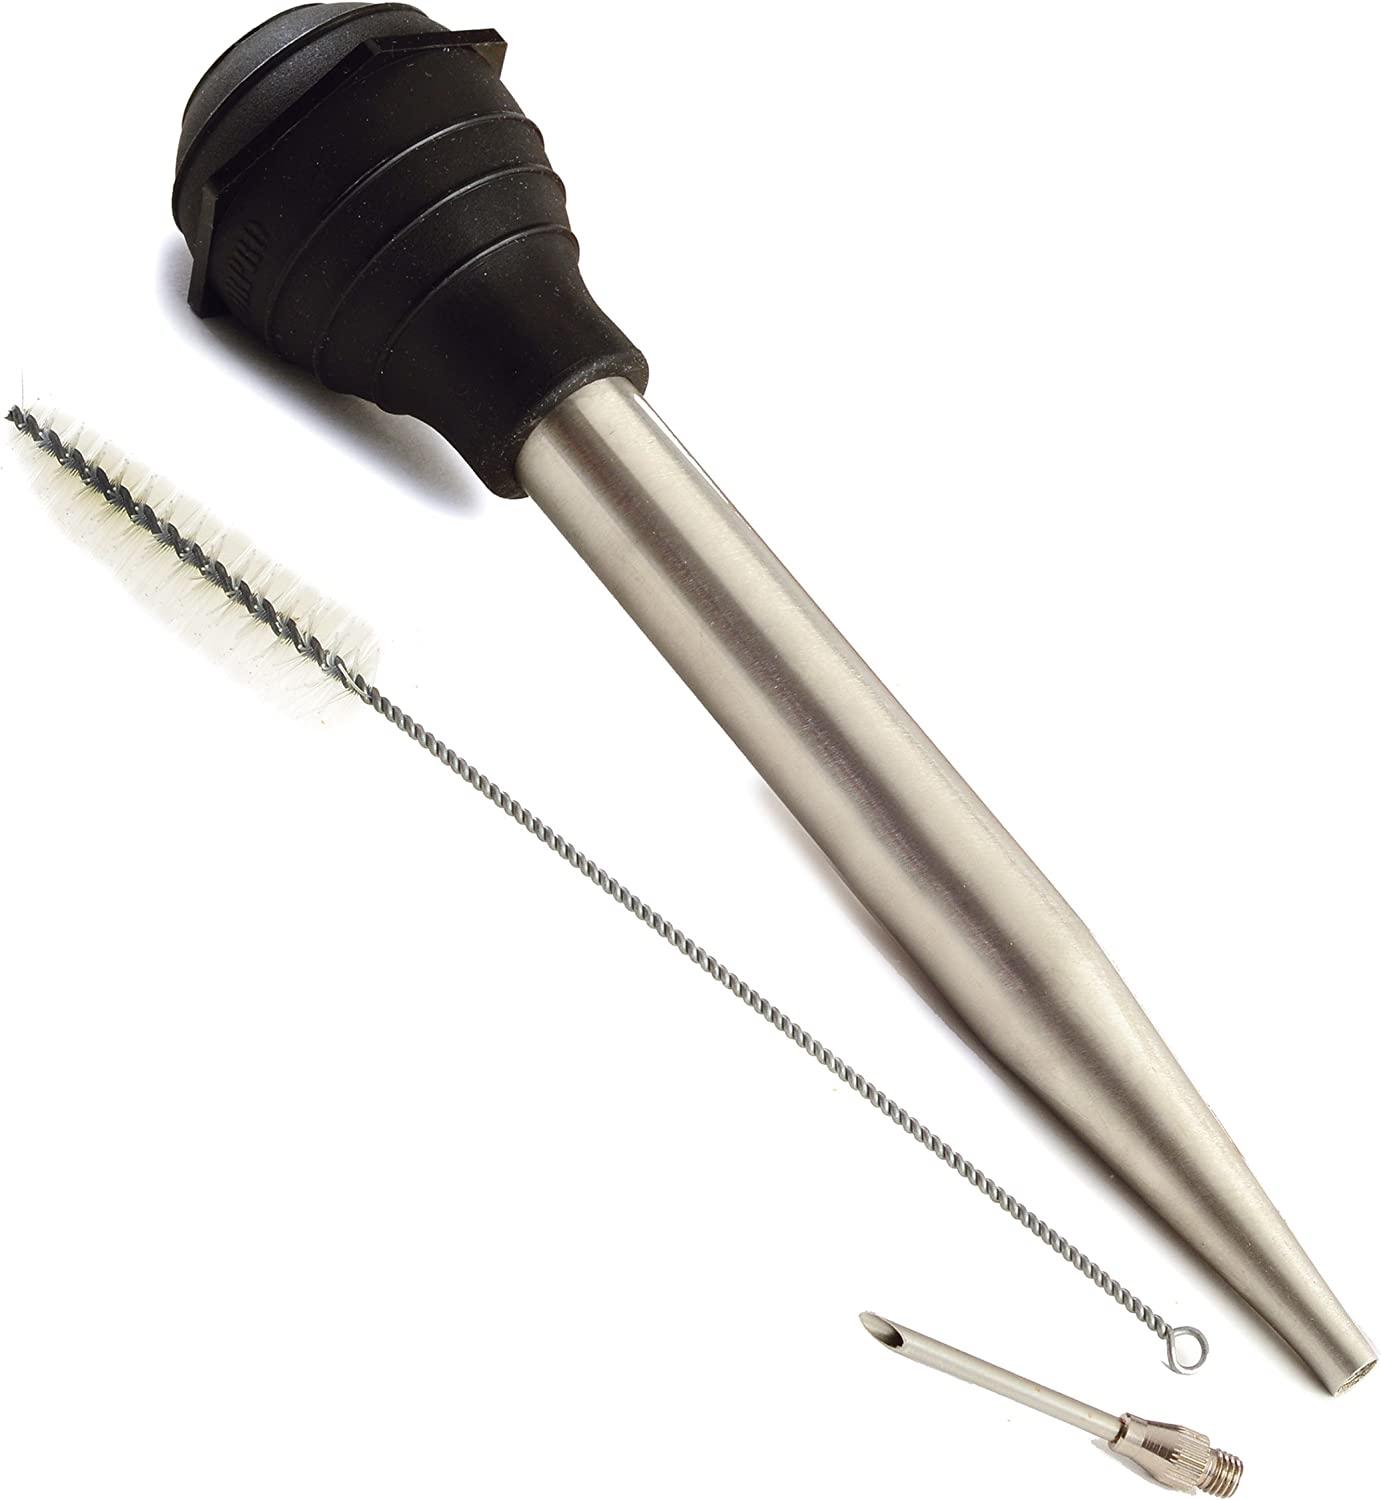 Norpro Deluxe Stainless Steel Baster with Injector and Cleaning Brush Import To Shop ×Product customization General Description